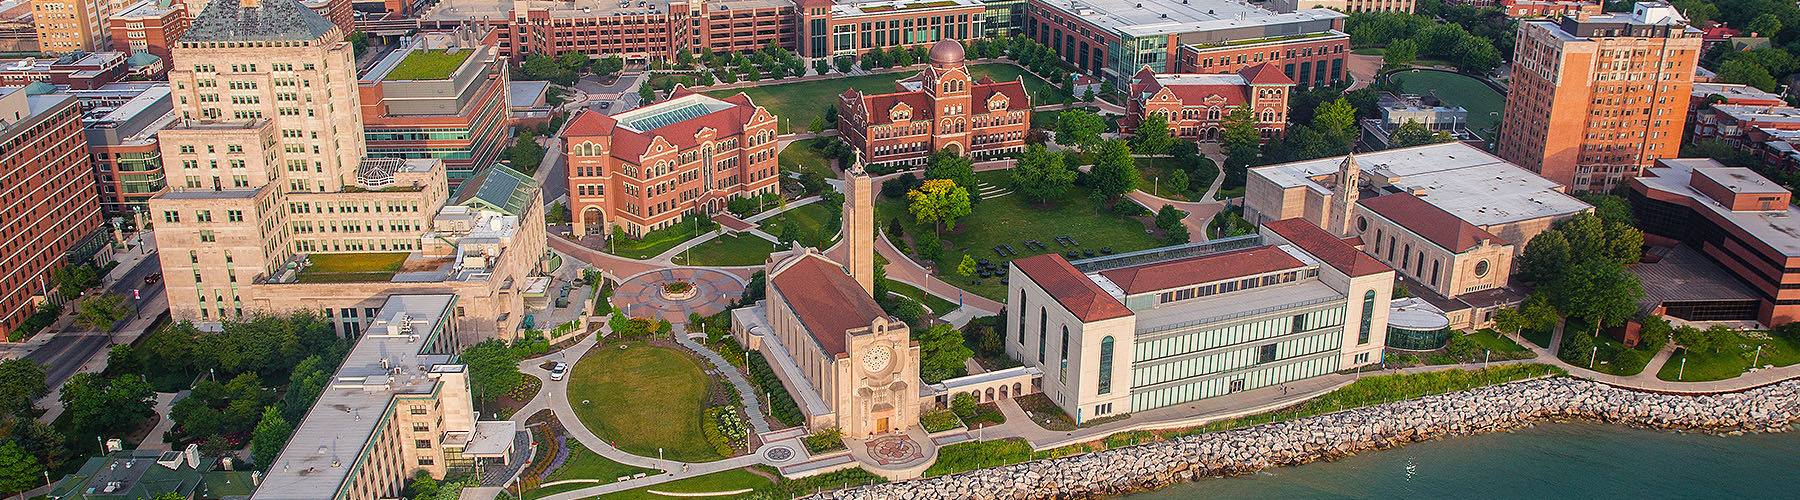 An aerial view of Loyola University Chicago's Lake Shore campus during the golden hour